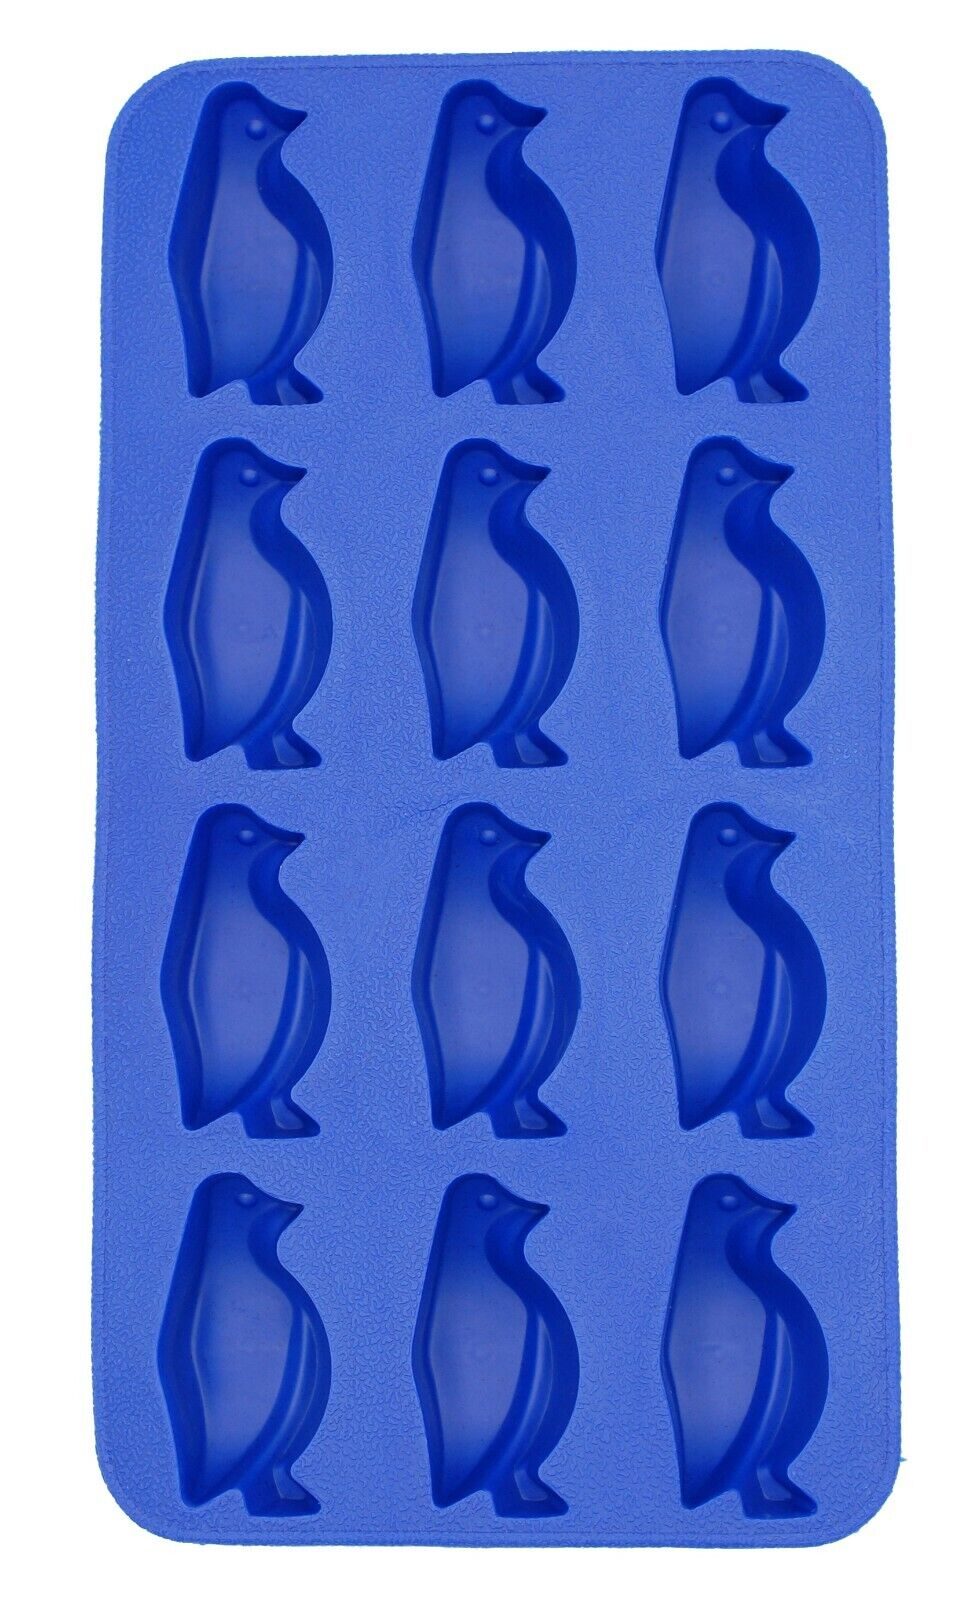 Silicone Flexible Plastic Penguin Shapes Ice Cube Tray Chocolate Mold 2 Pack